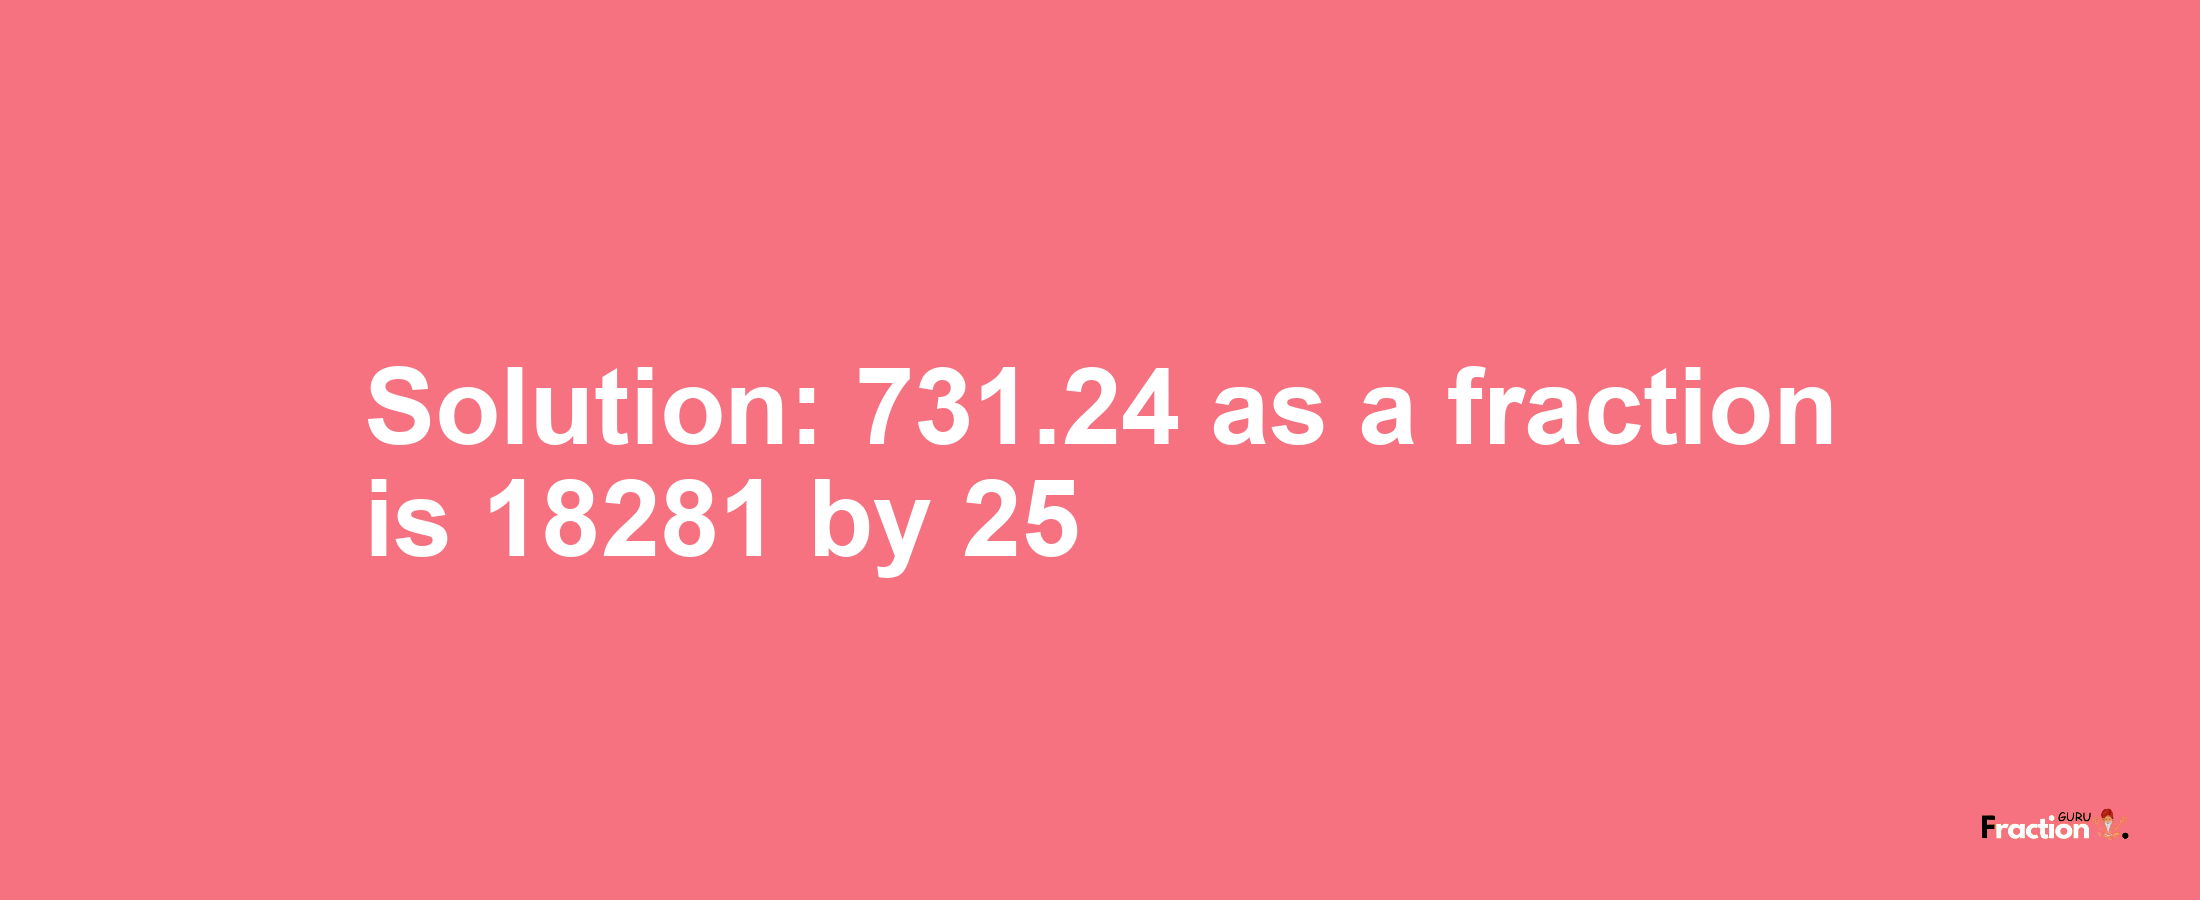 Solution:731.24 as a fraction is 18281/25